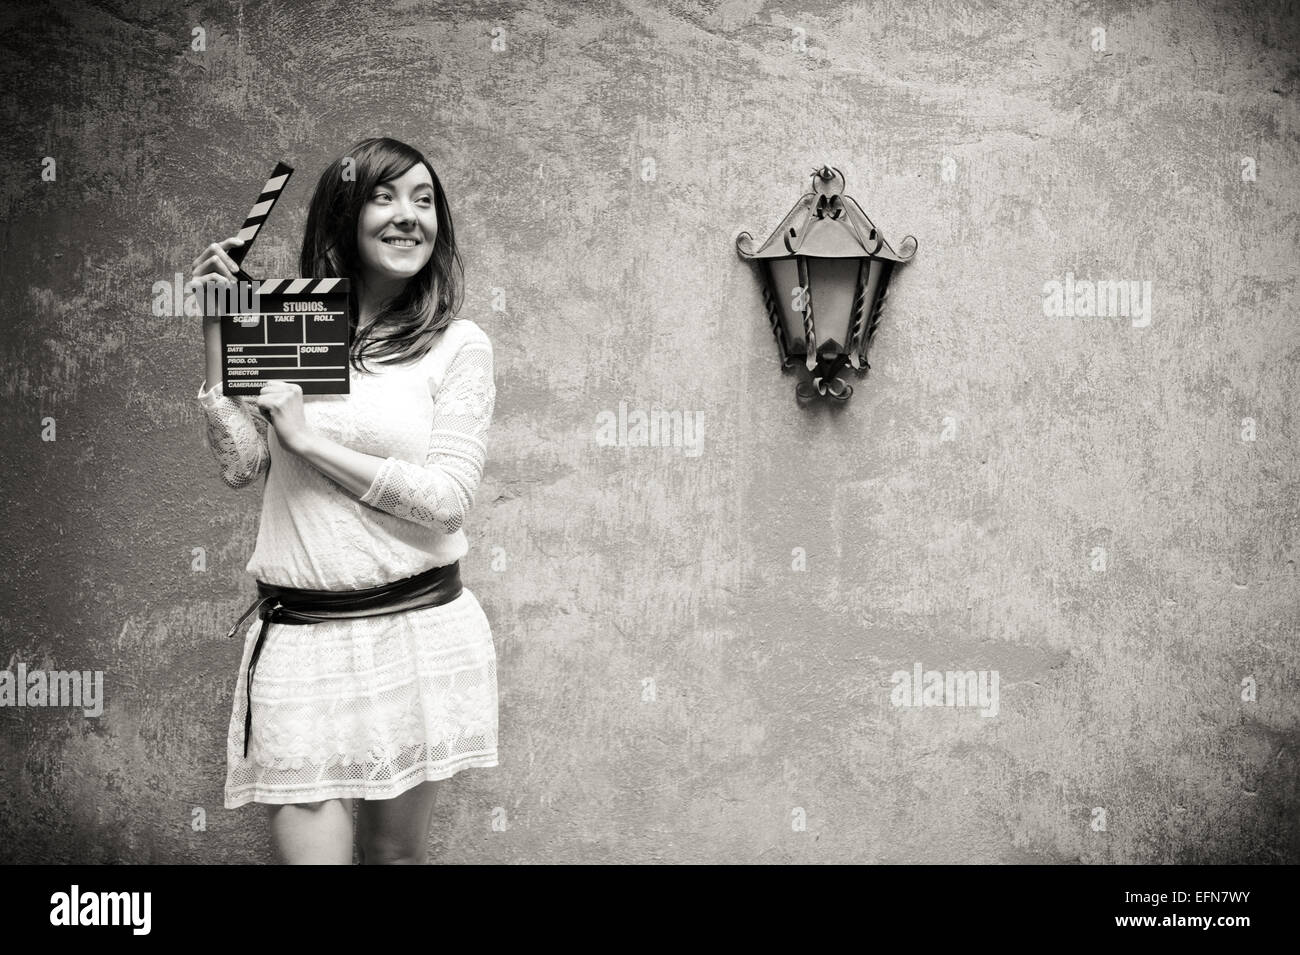 Young woman in 70s hippie style smiling with clapperboard, outdoor wall and lamp background in black and white Stock Photo